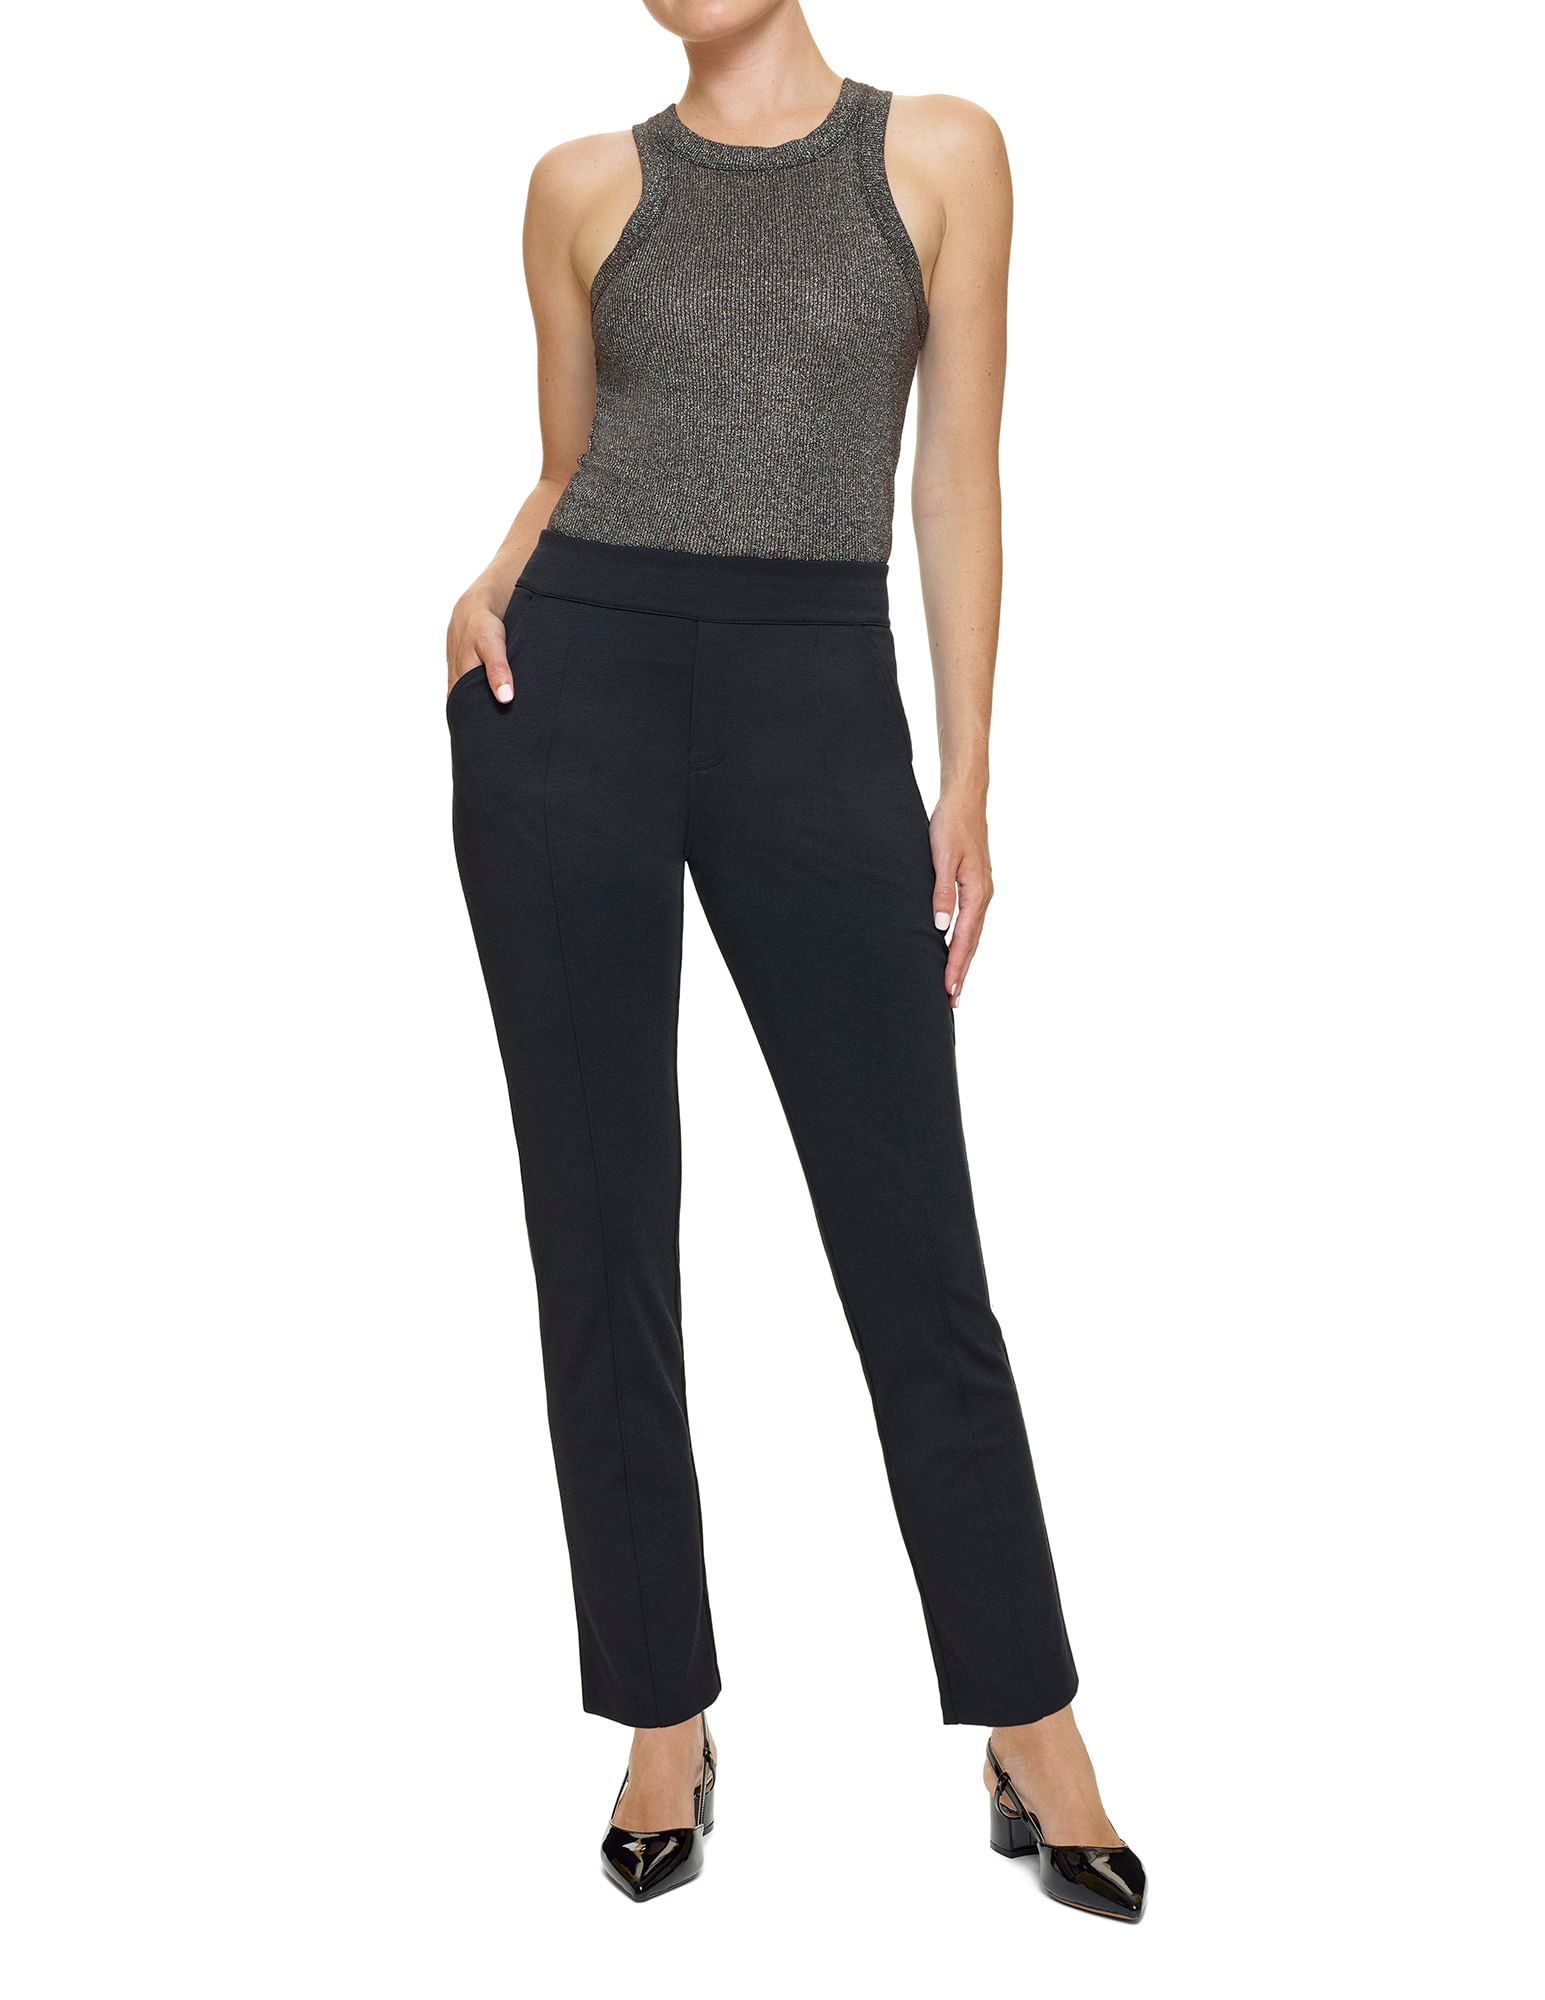 Hue Distressed Leatherette Leggings Black at  Women's Clothing store